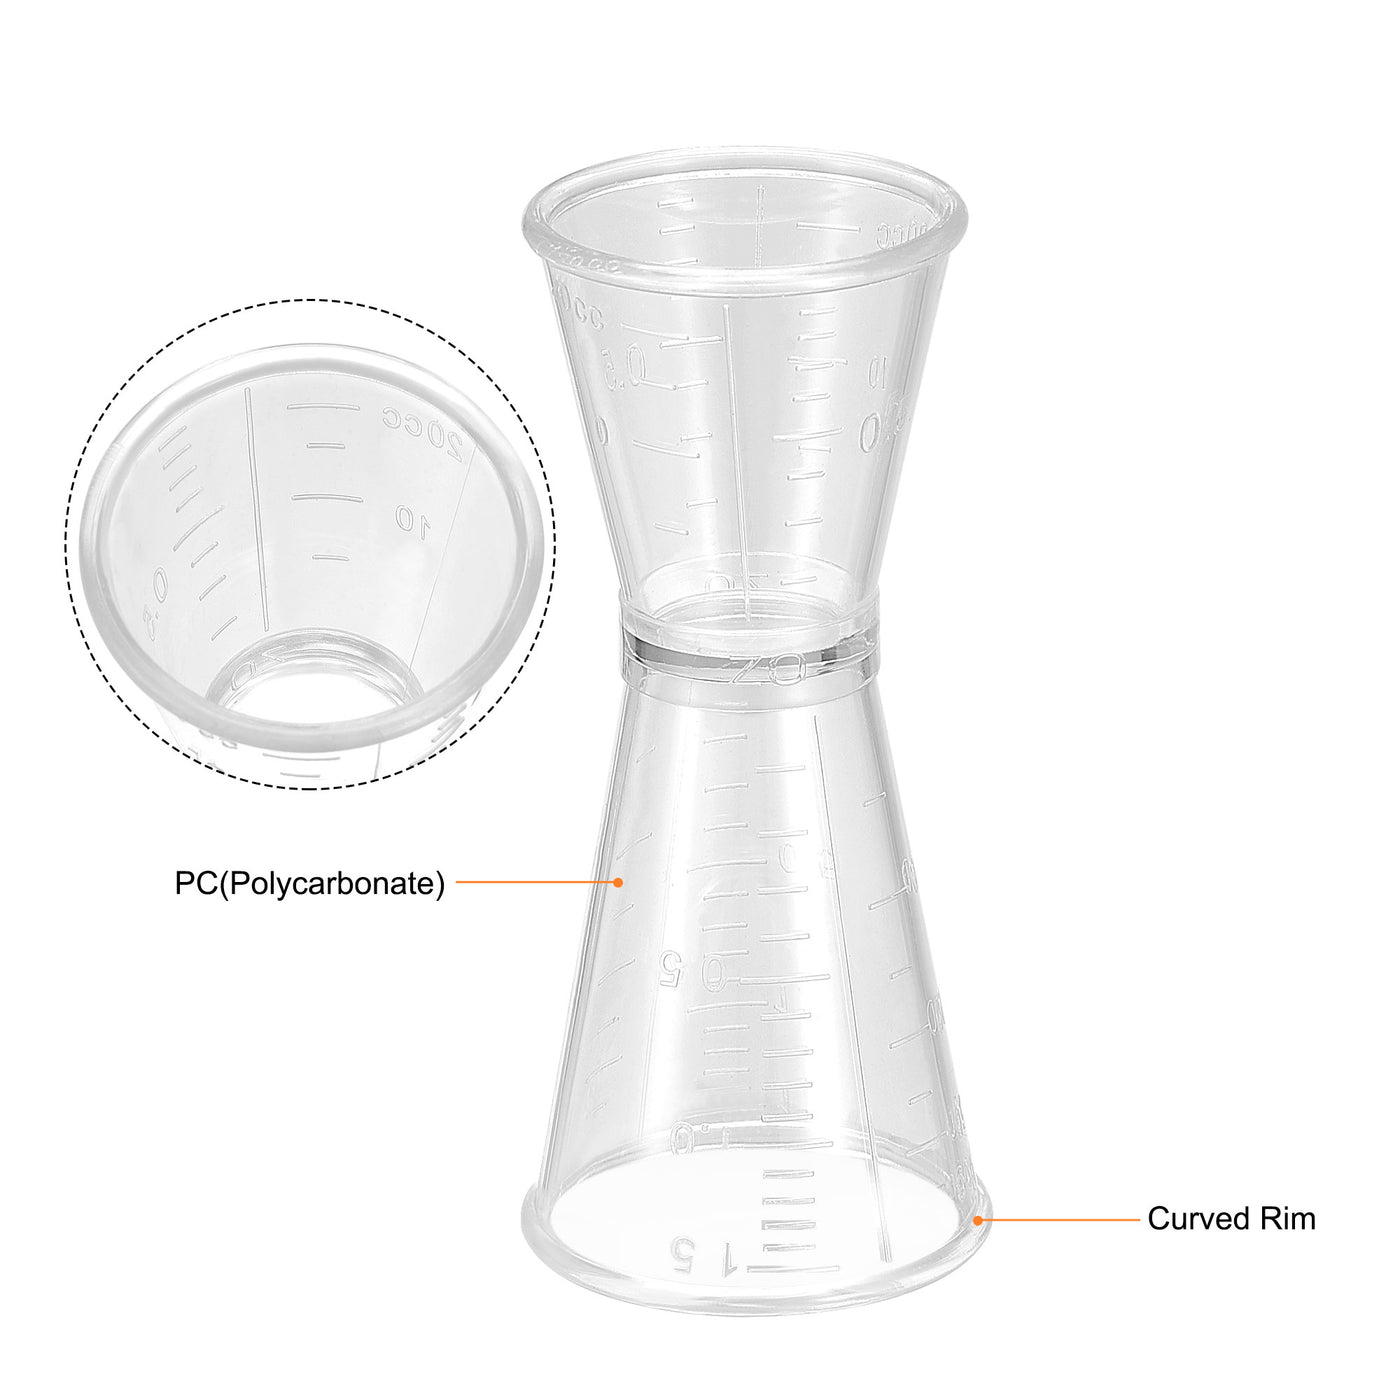 uxcell Uxcell Measuring Cup 40ml/20ml PC Plastic Double Head Beaker Clear 3Pcs